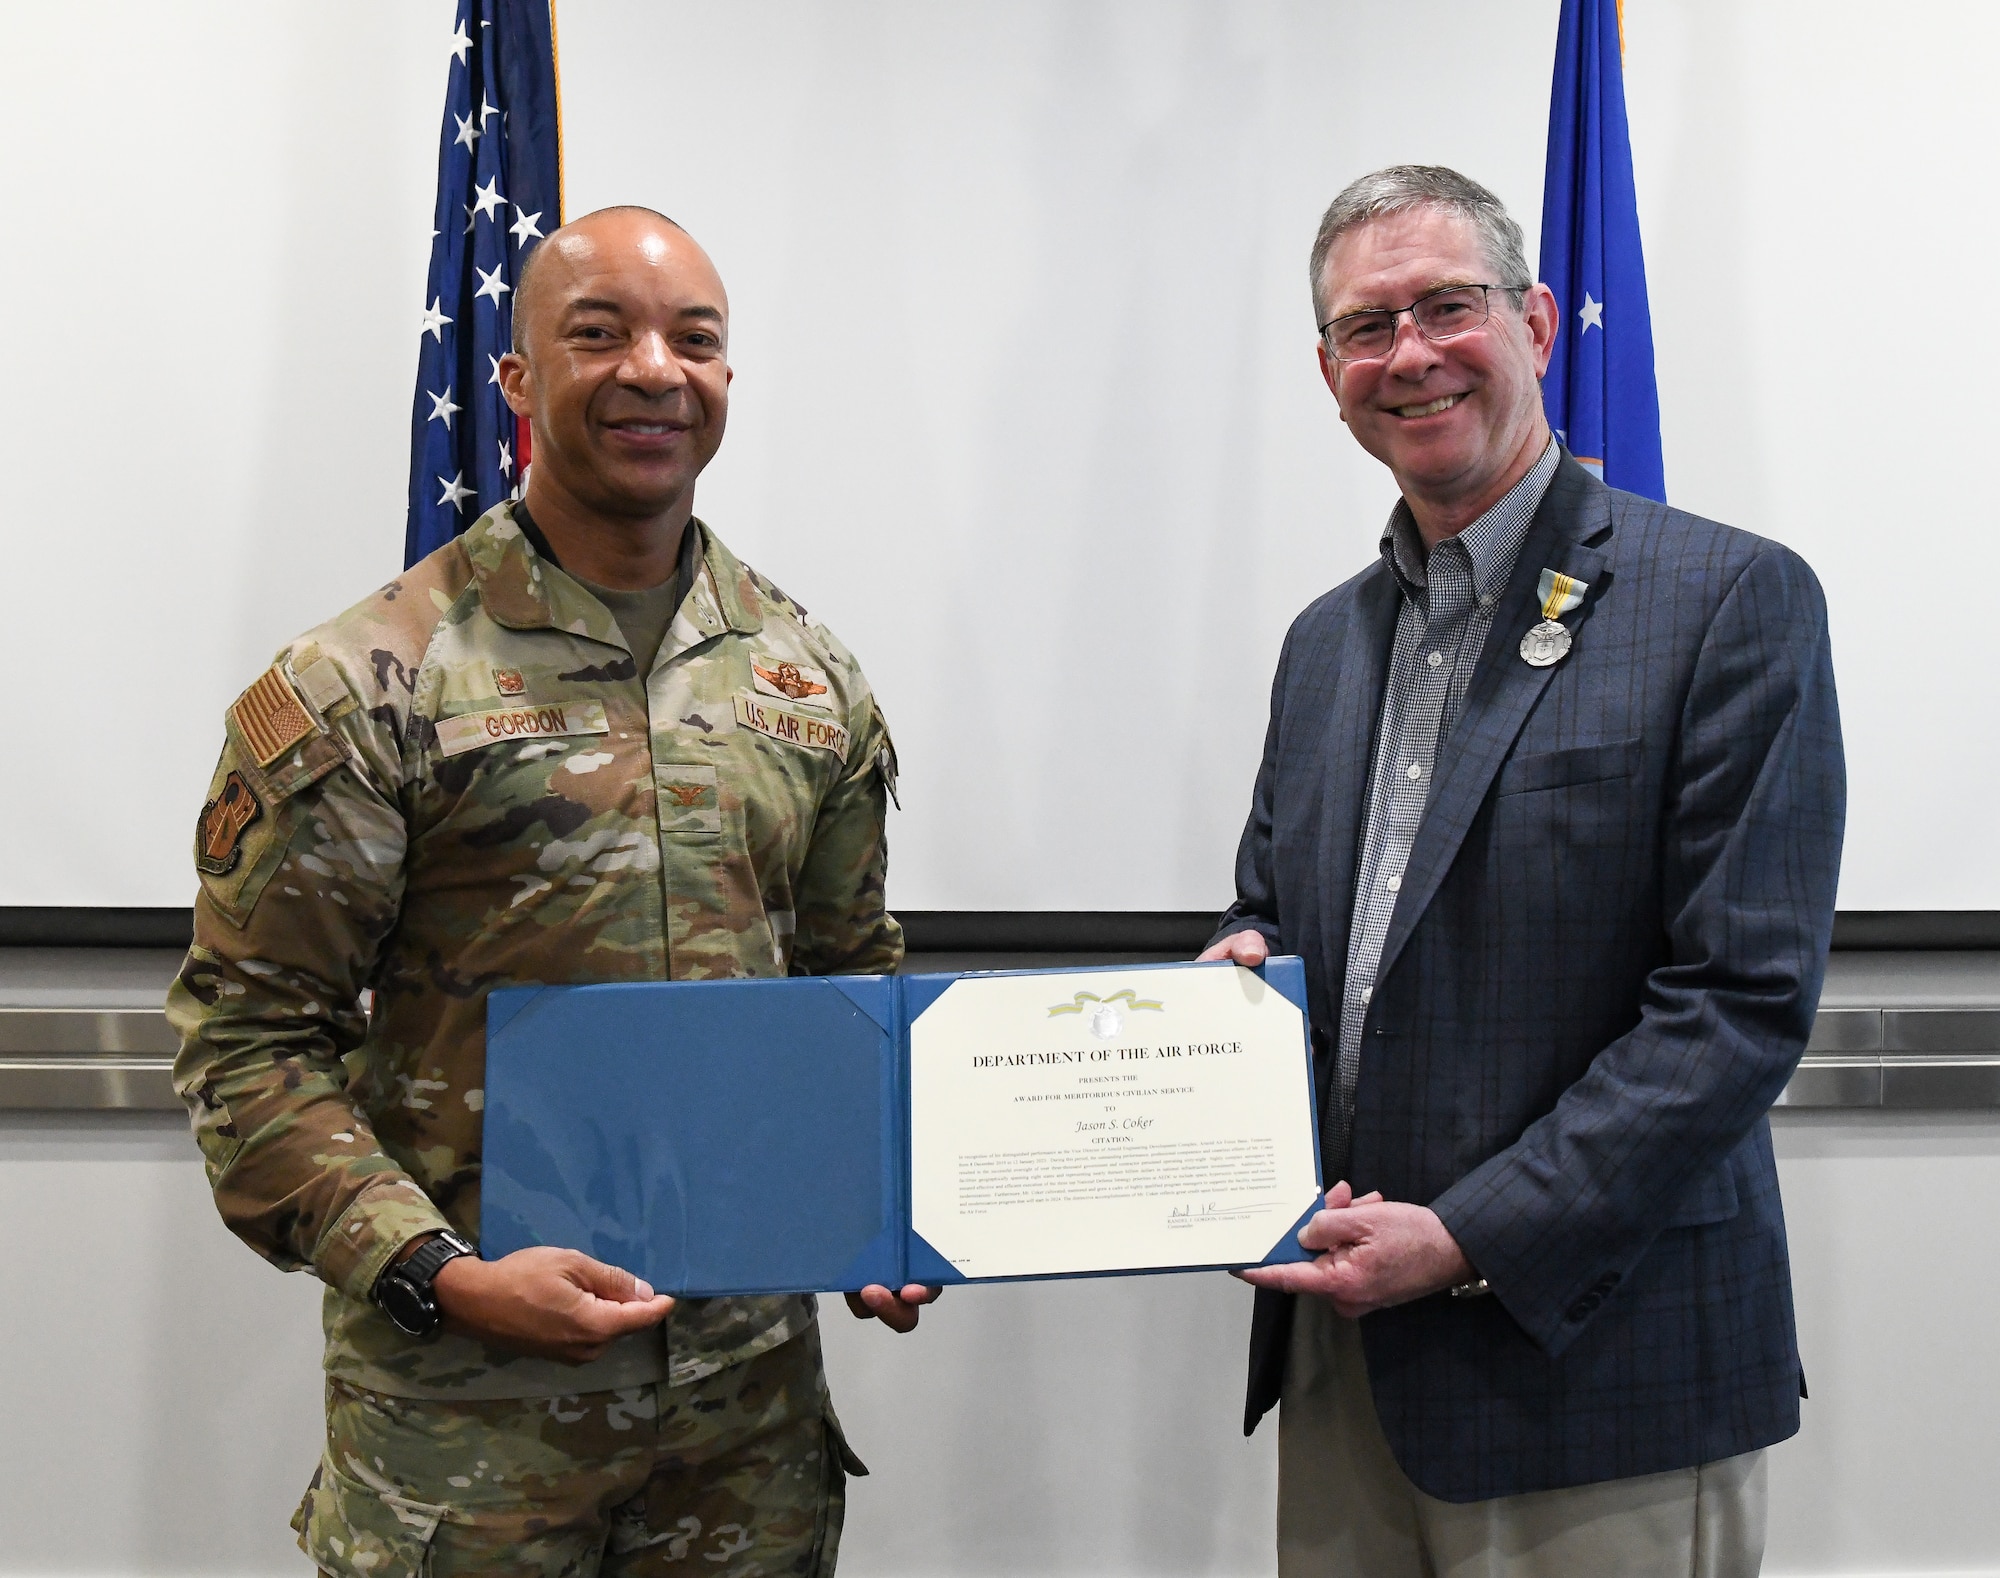 Air Force colonel presenting award citation to civilian